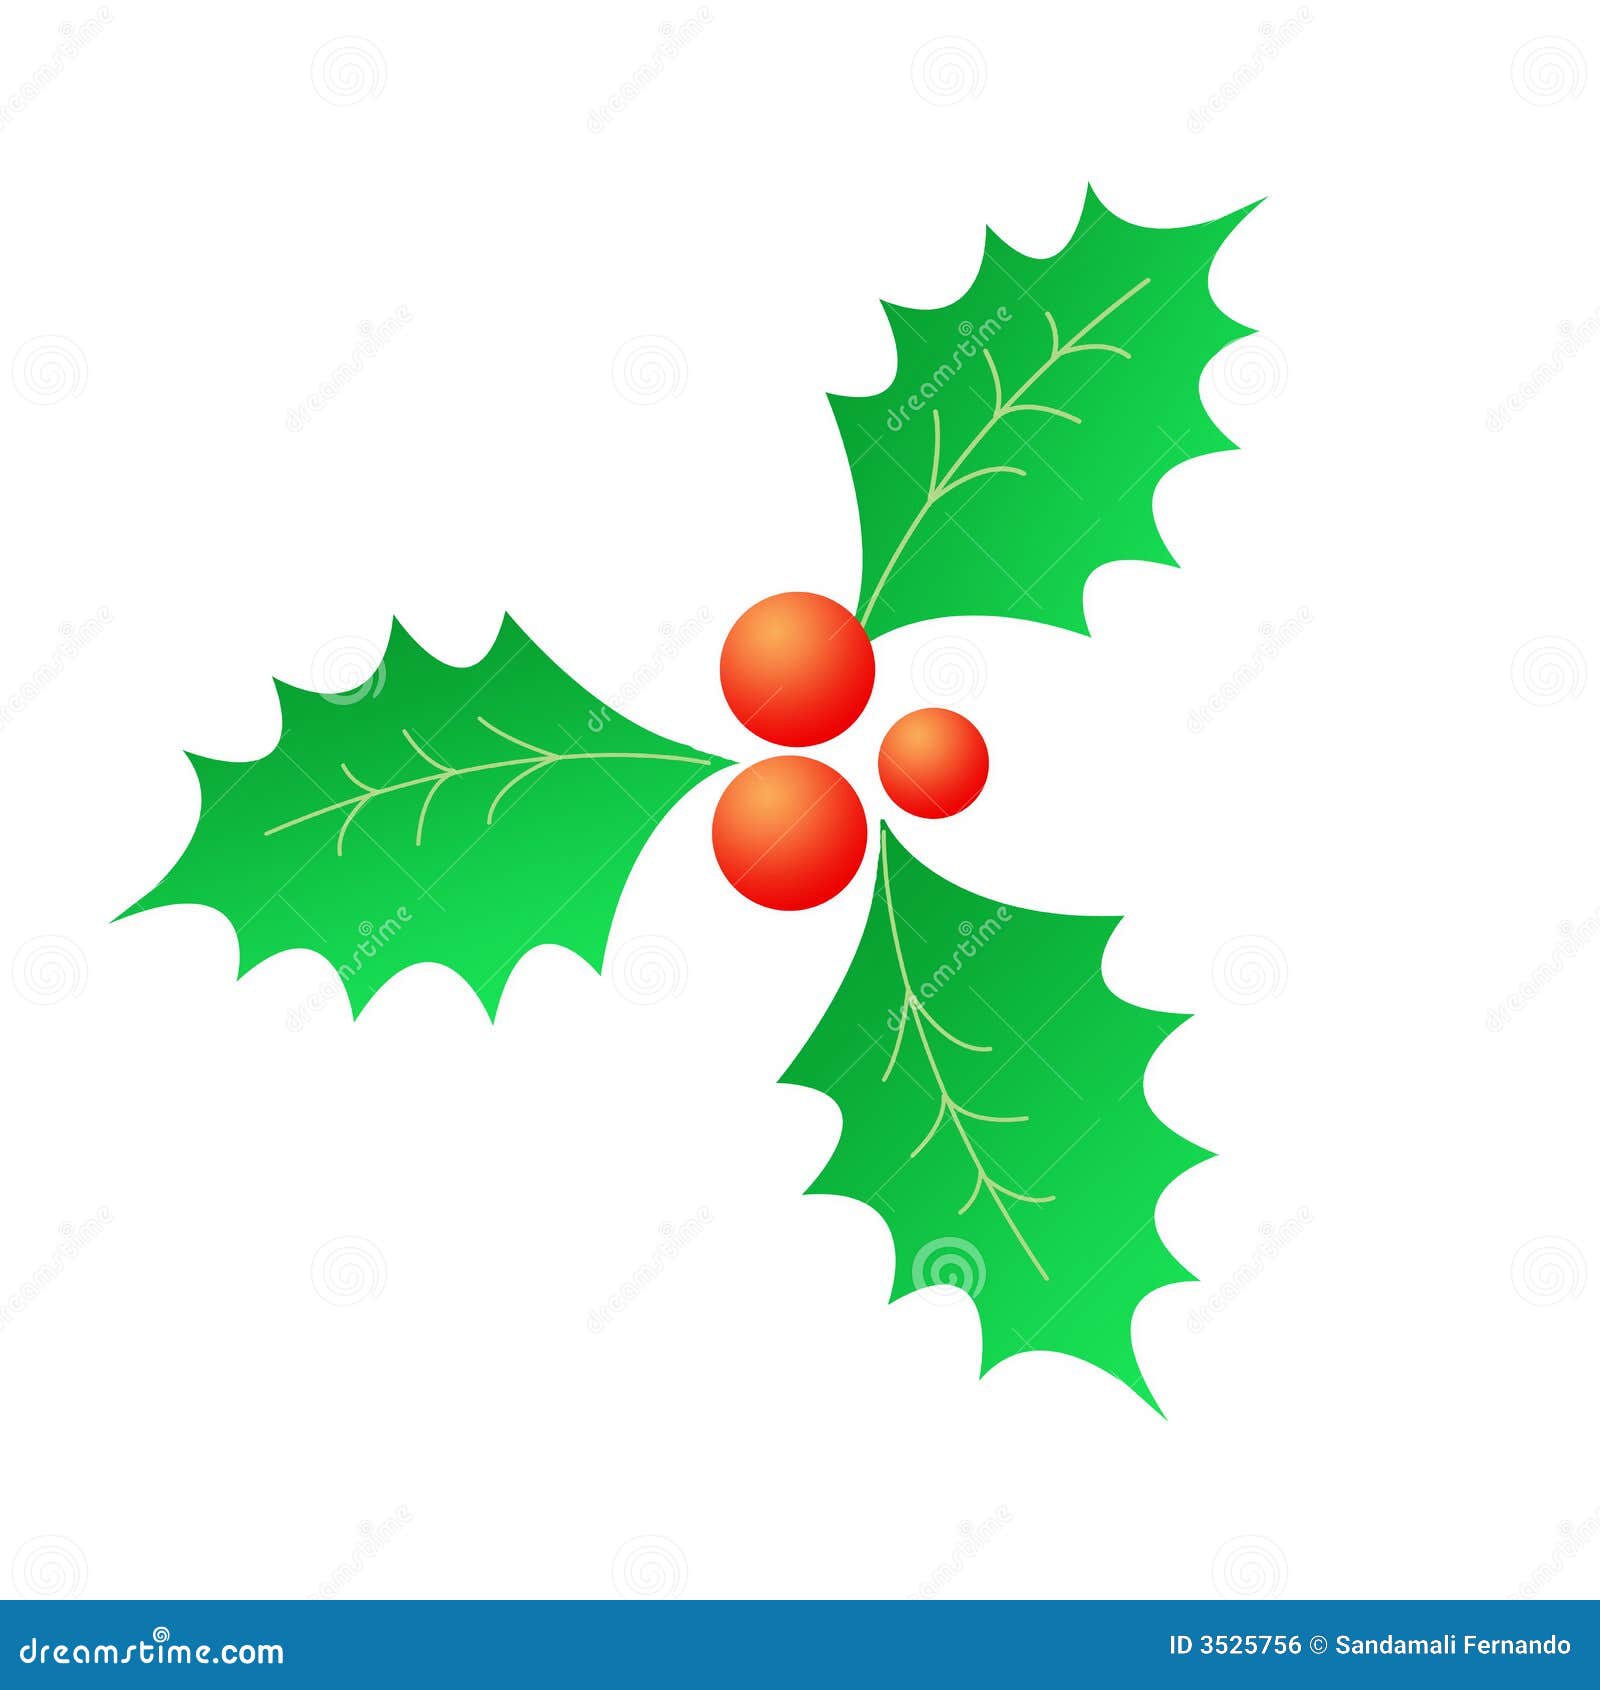 microsoft office clipart holly - photo #4